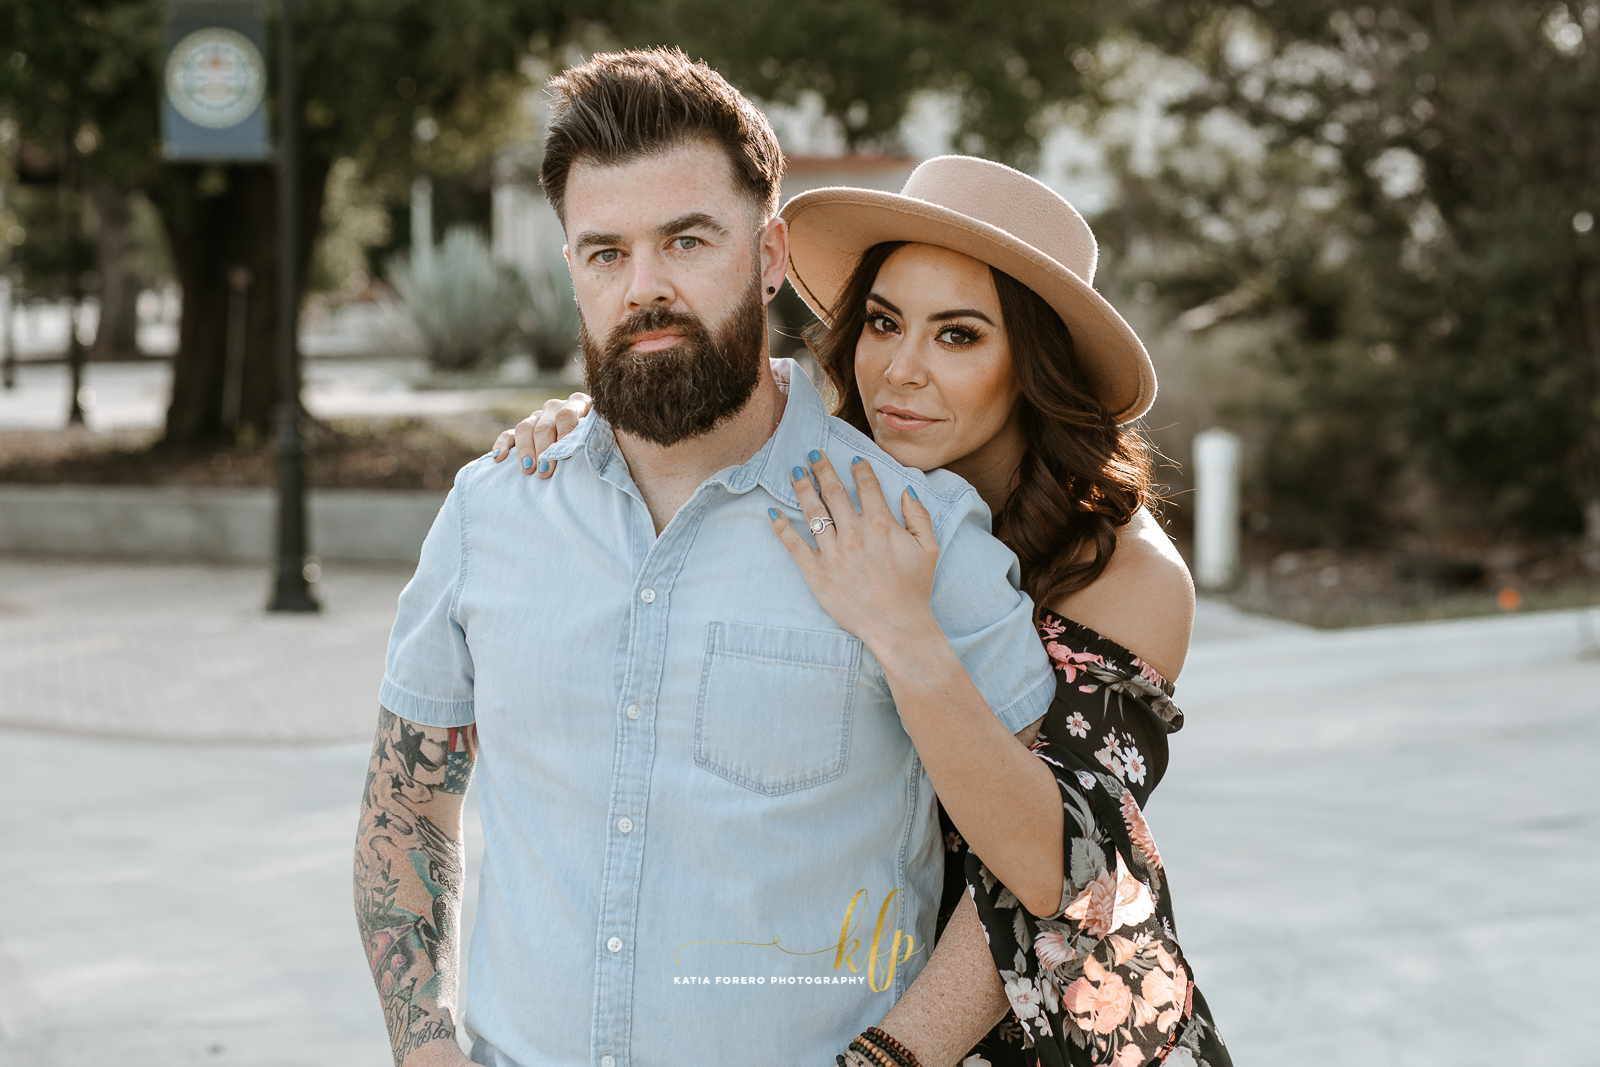 Small town engagement sessions